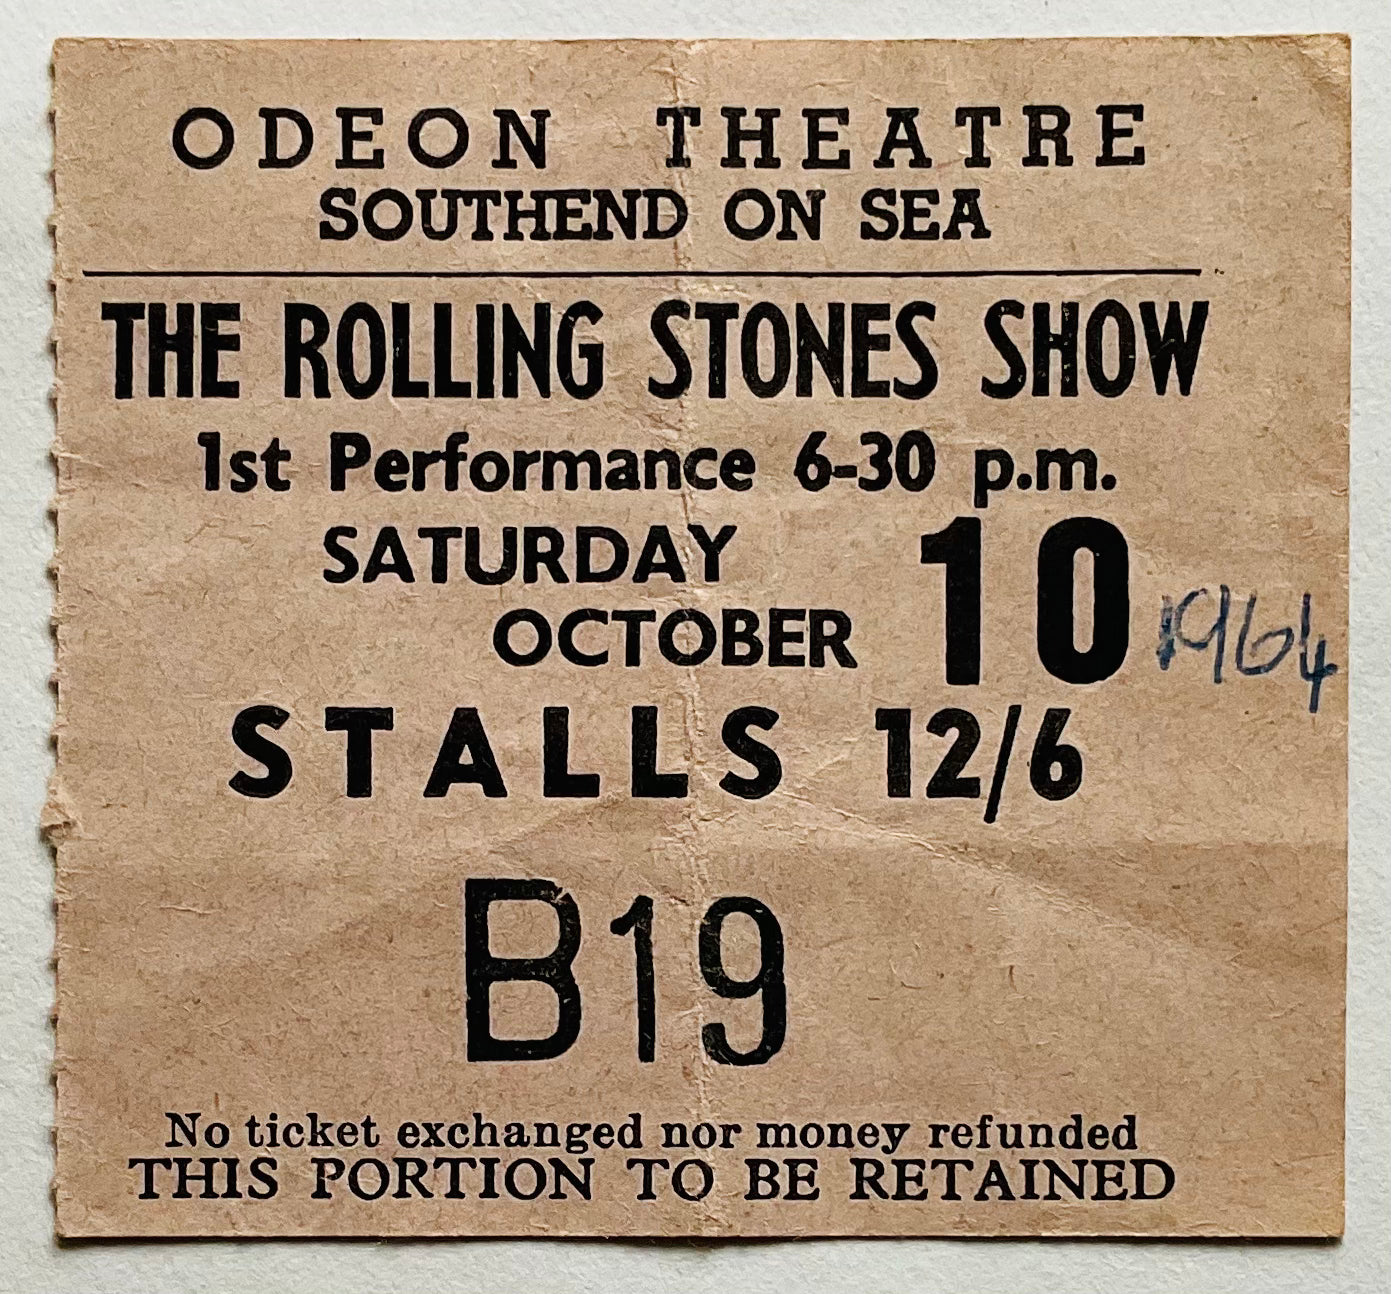 Rolling Stones Original Used Concert Ticket Odeon Theatre Southend on Sea 1964